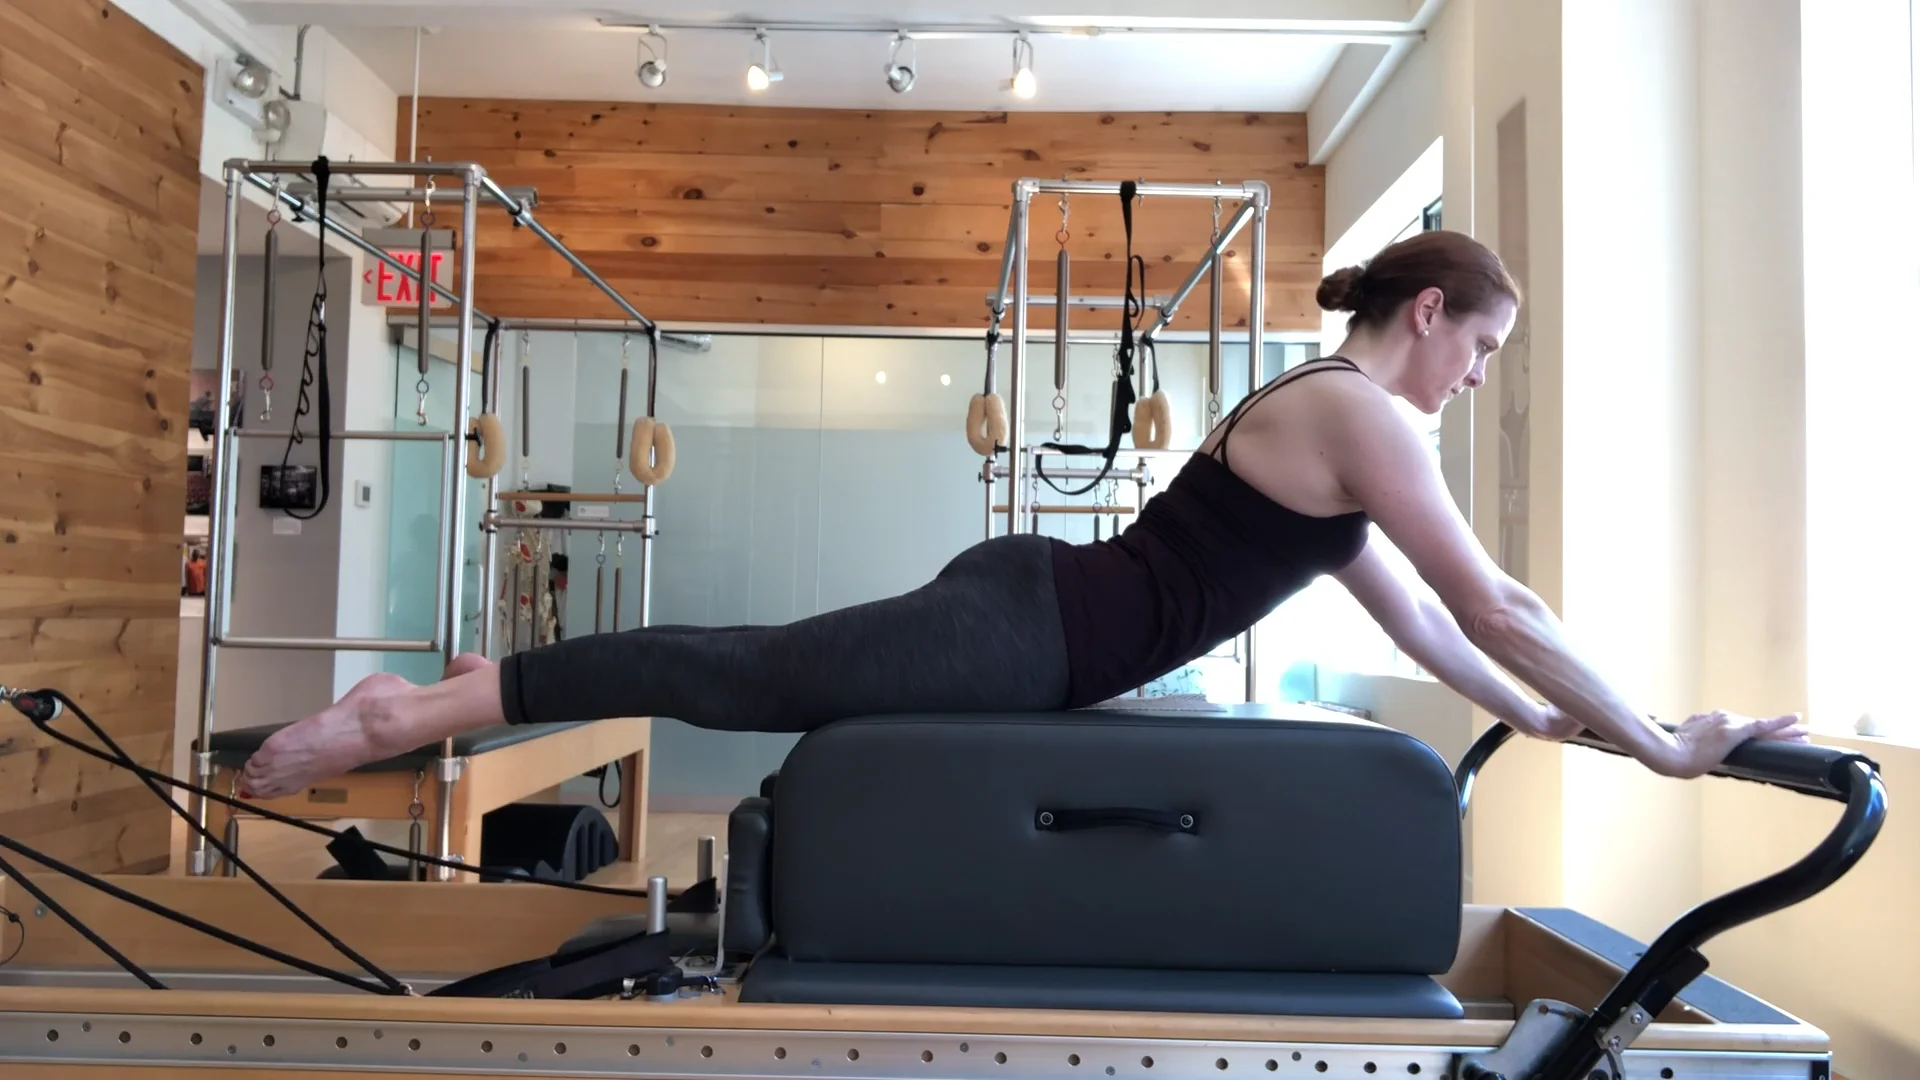 Long Box Series on Reformer: Overhead Press - Scapular Elevation/Depression  - Spinal Extension on Vimeo